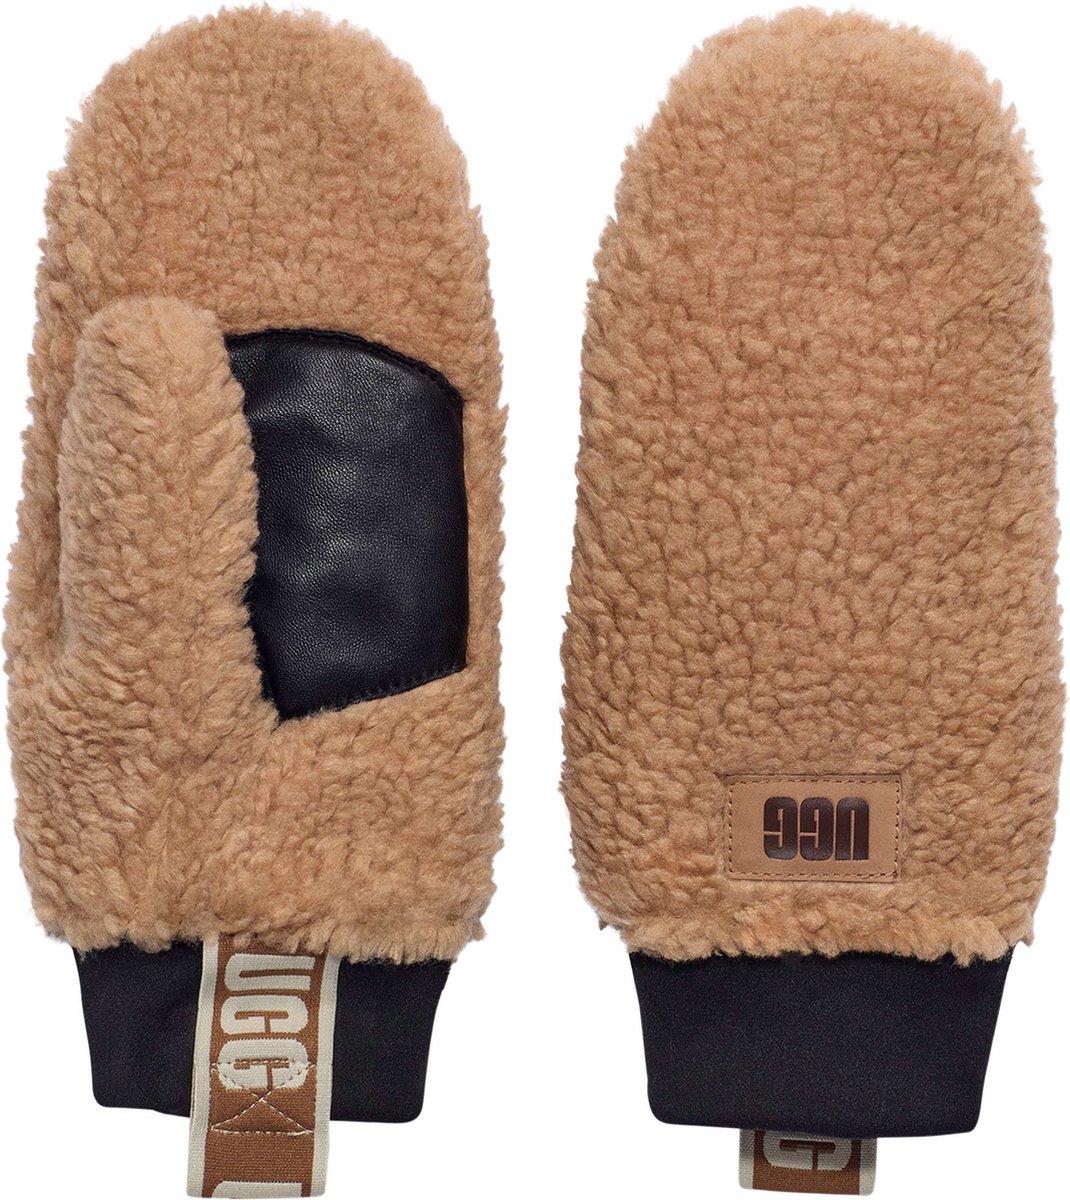 Ugg Mitaines Sherpa Femme Camel taille S/M | bol.com